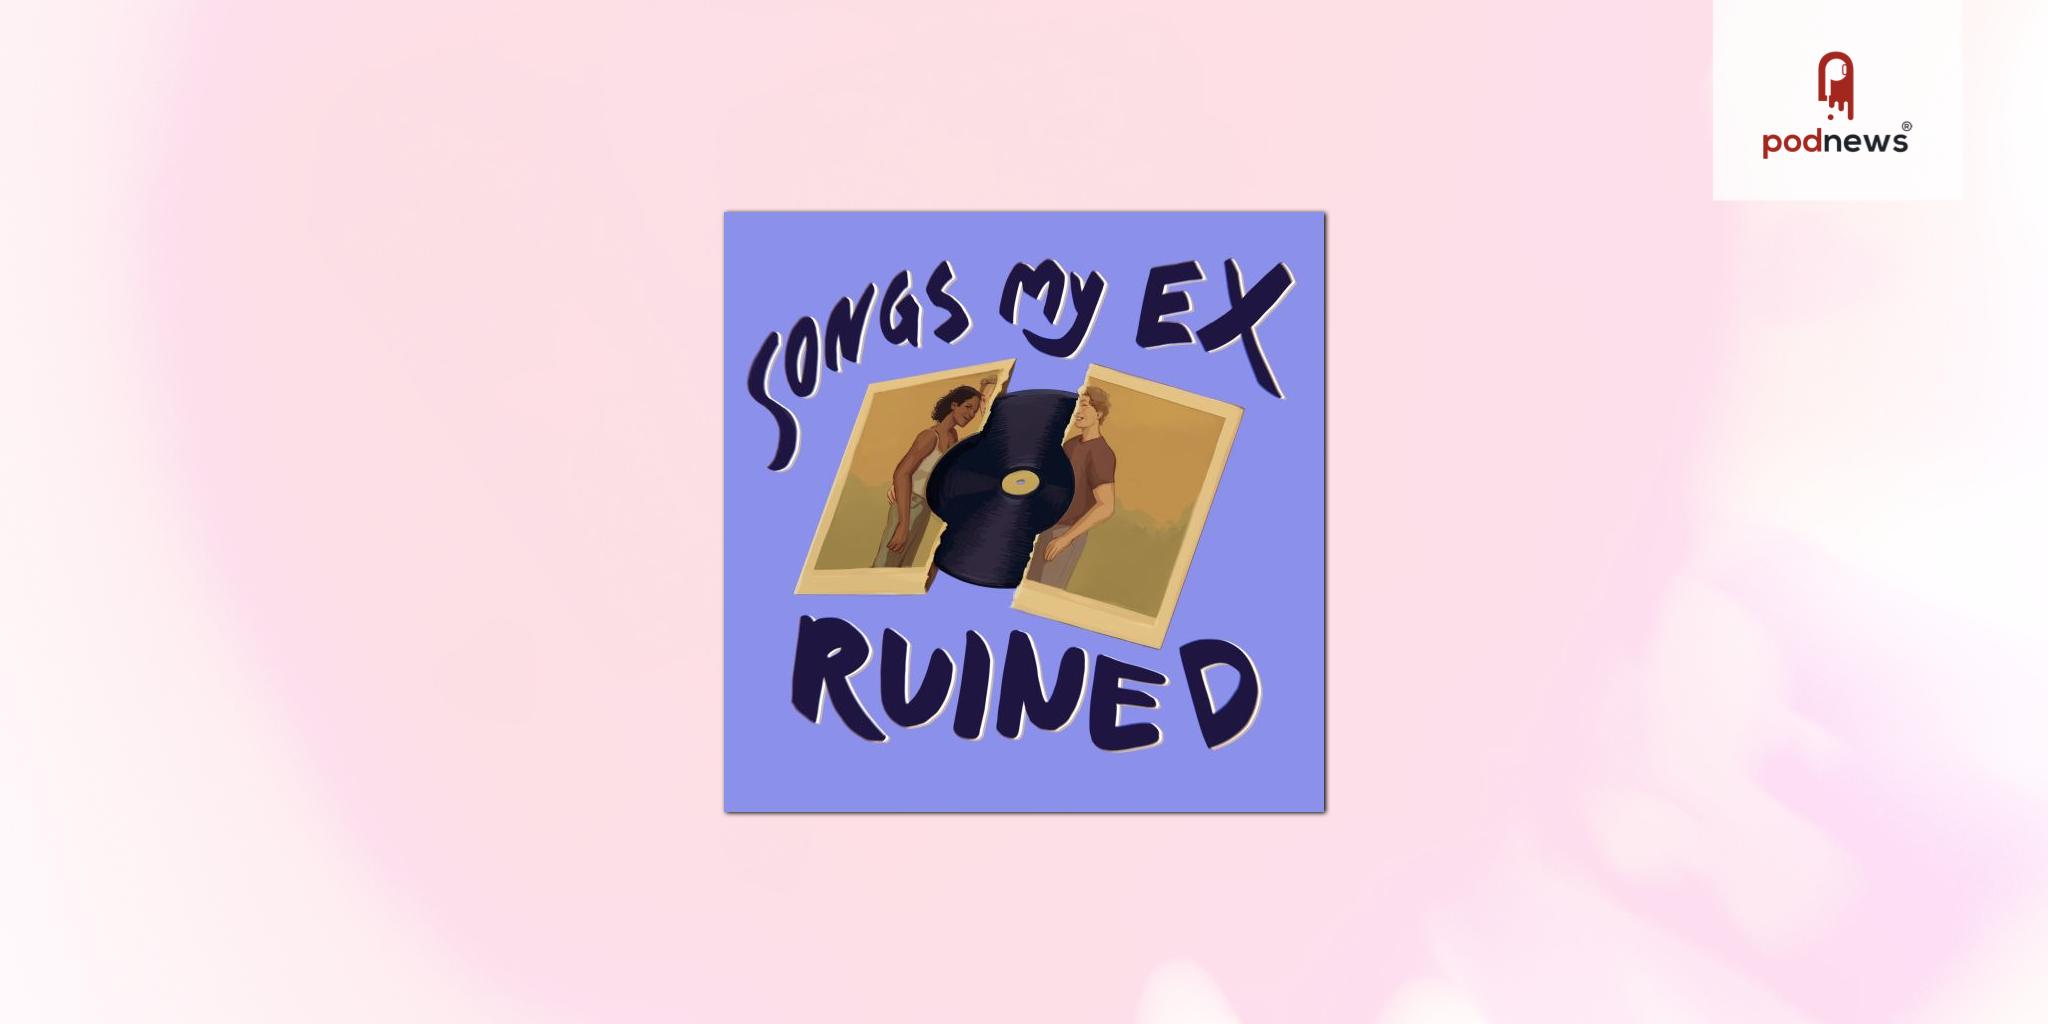 This Valentine’s Day commiserate with Songs My Ex Ruined, a podcast from Nevermind Media